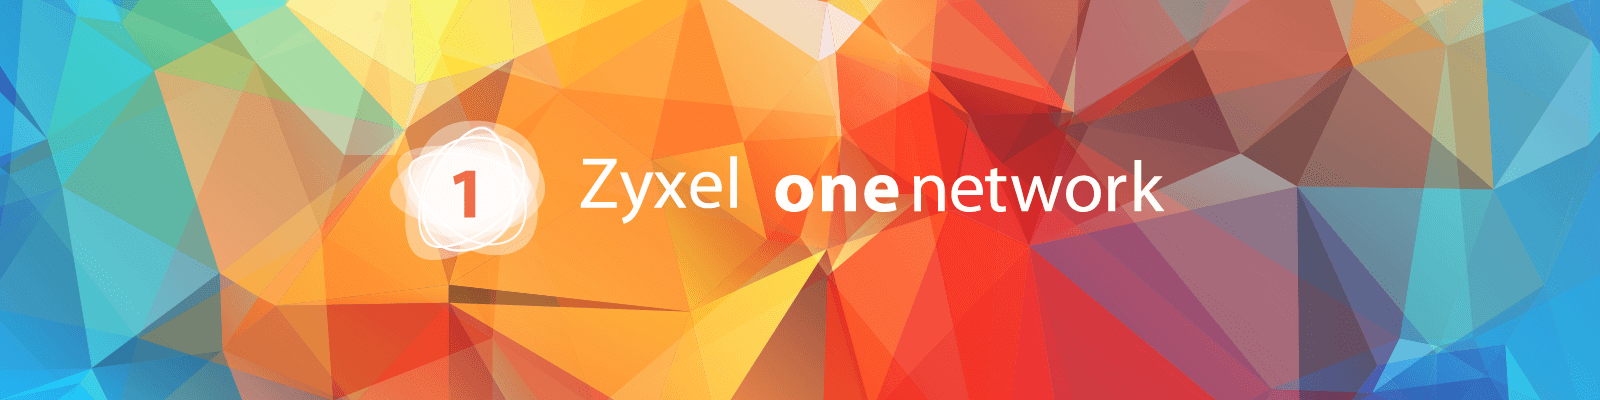 Zyxel One Network experience